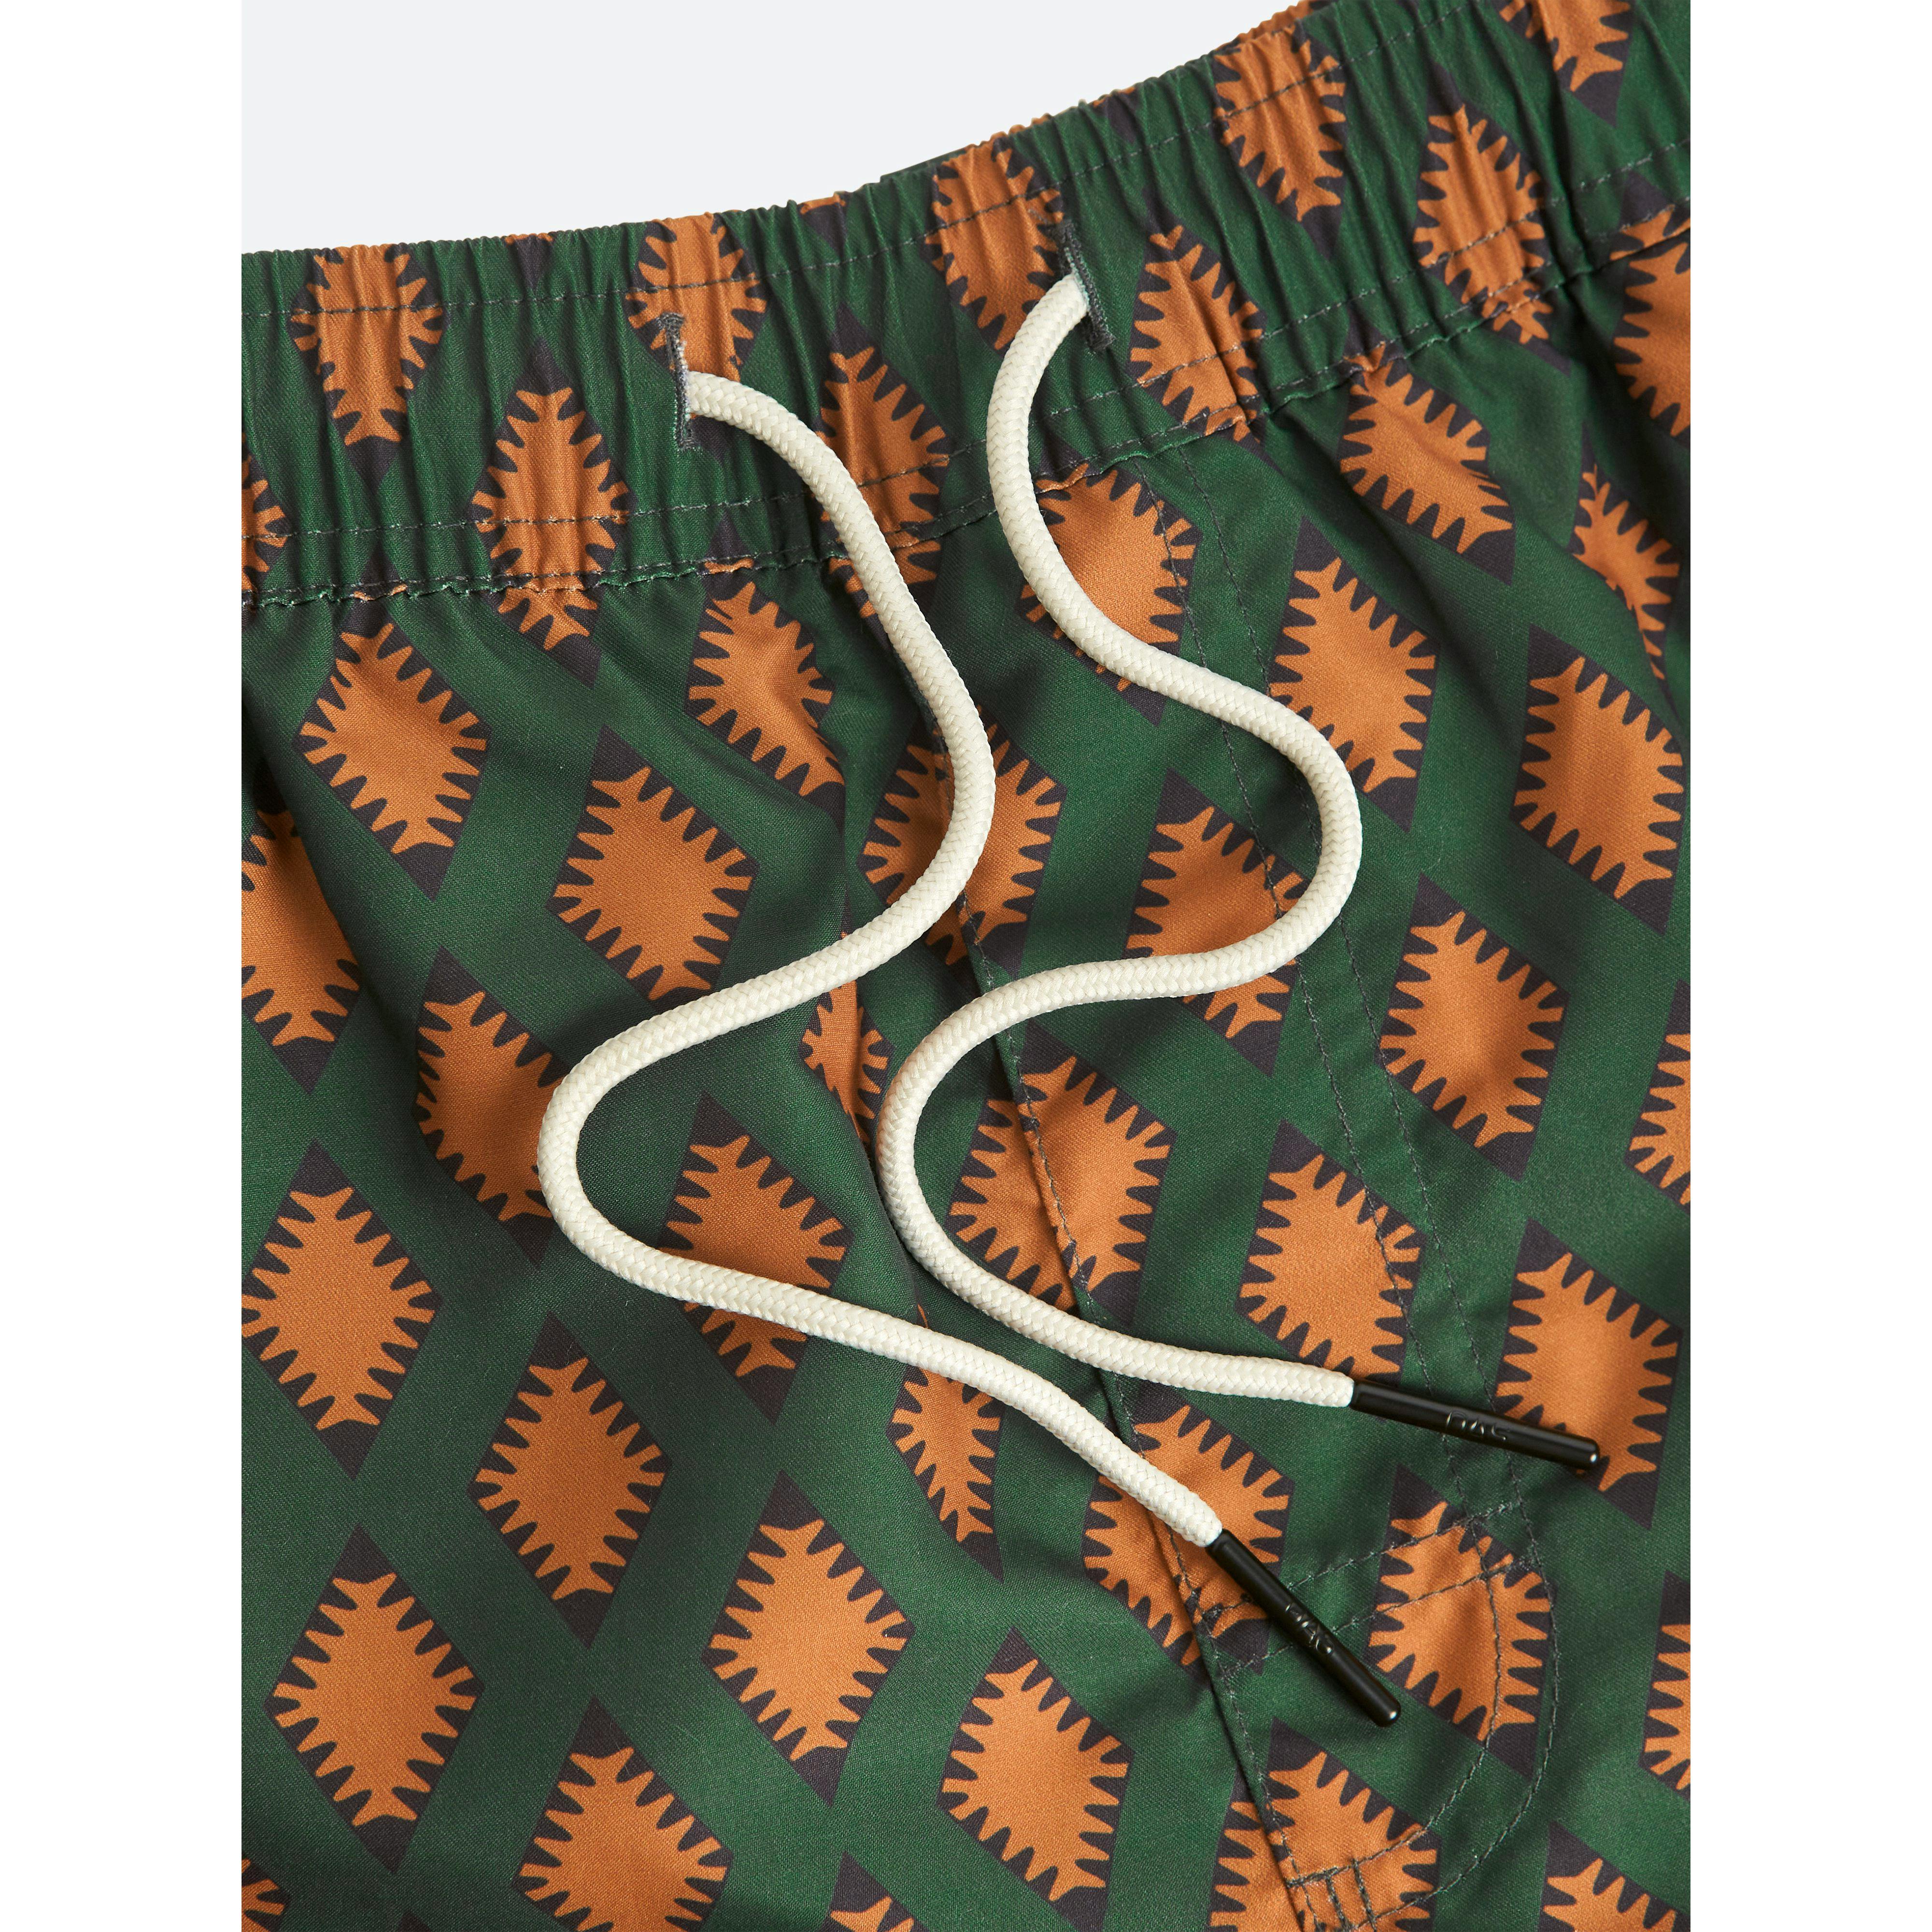 OAS Smokin Rustic Swim Shorts (L) At Nykaa Fashion - Your Online Shopping Store